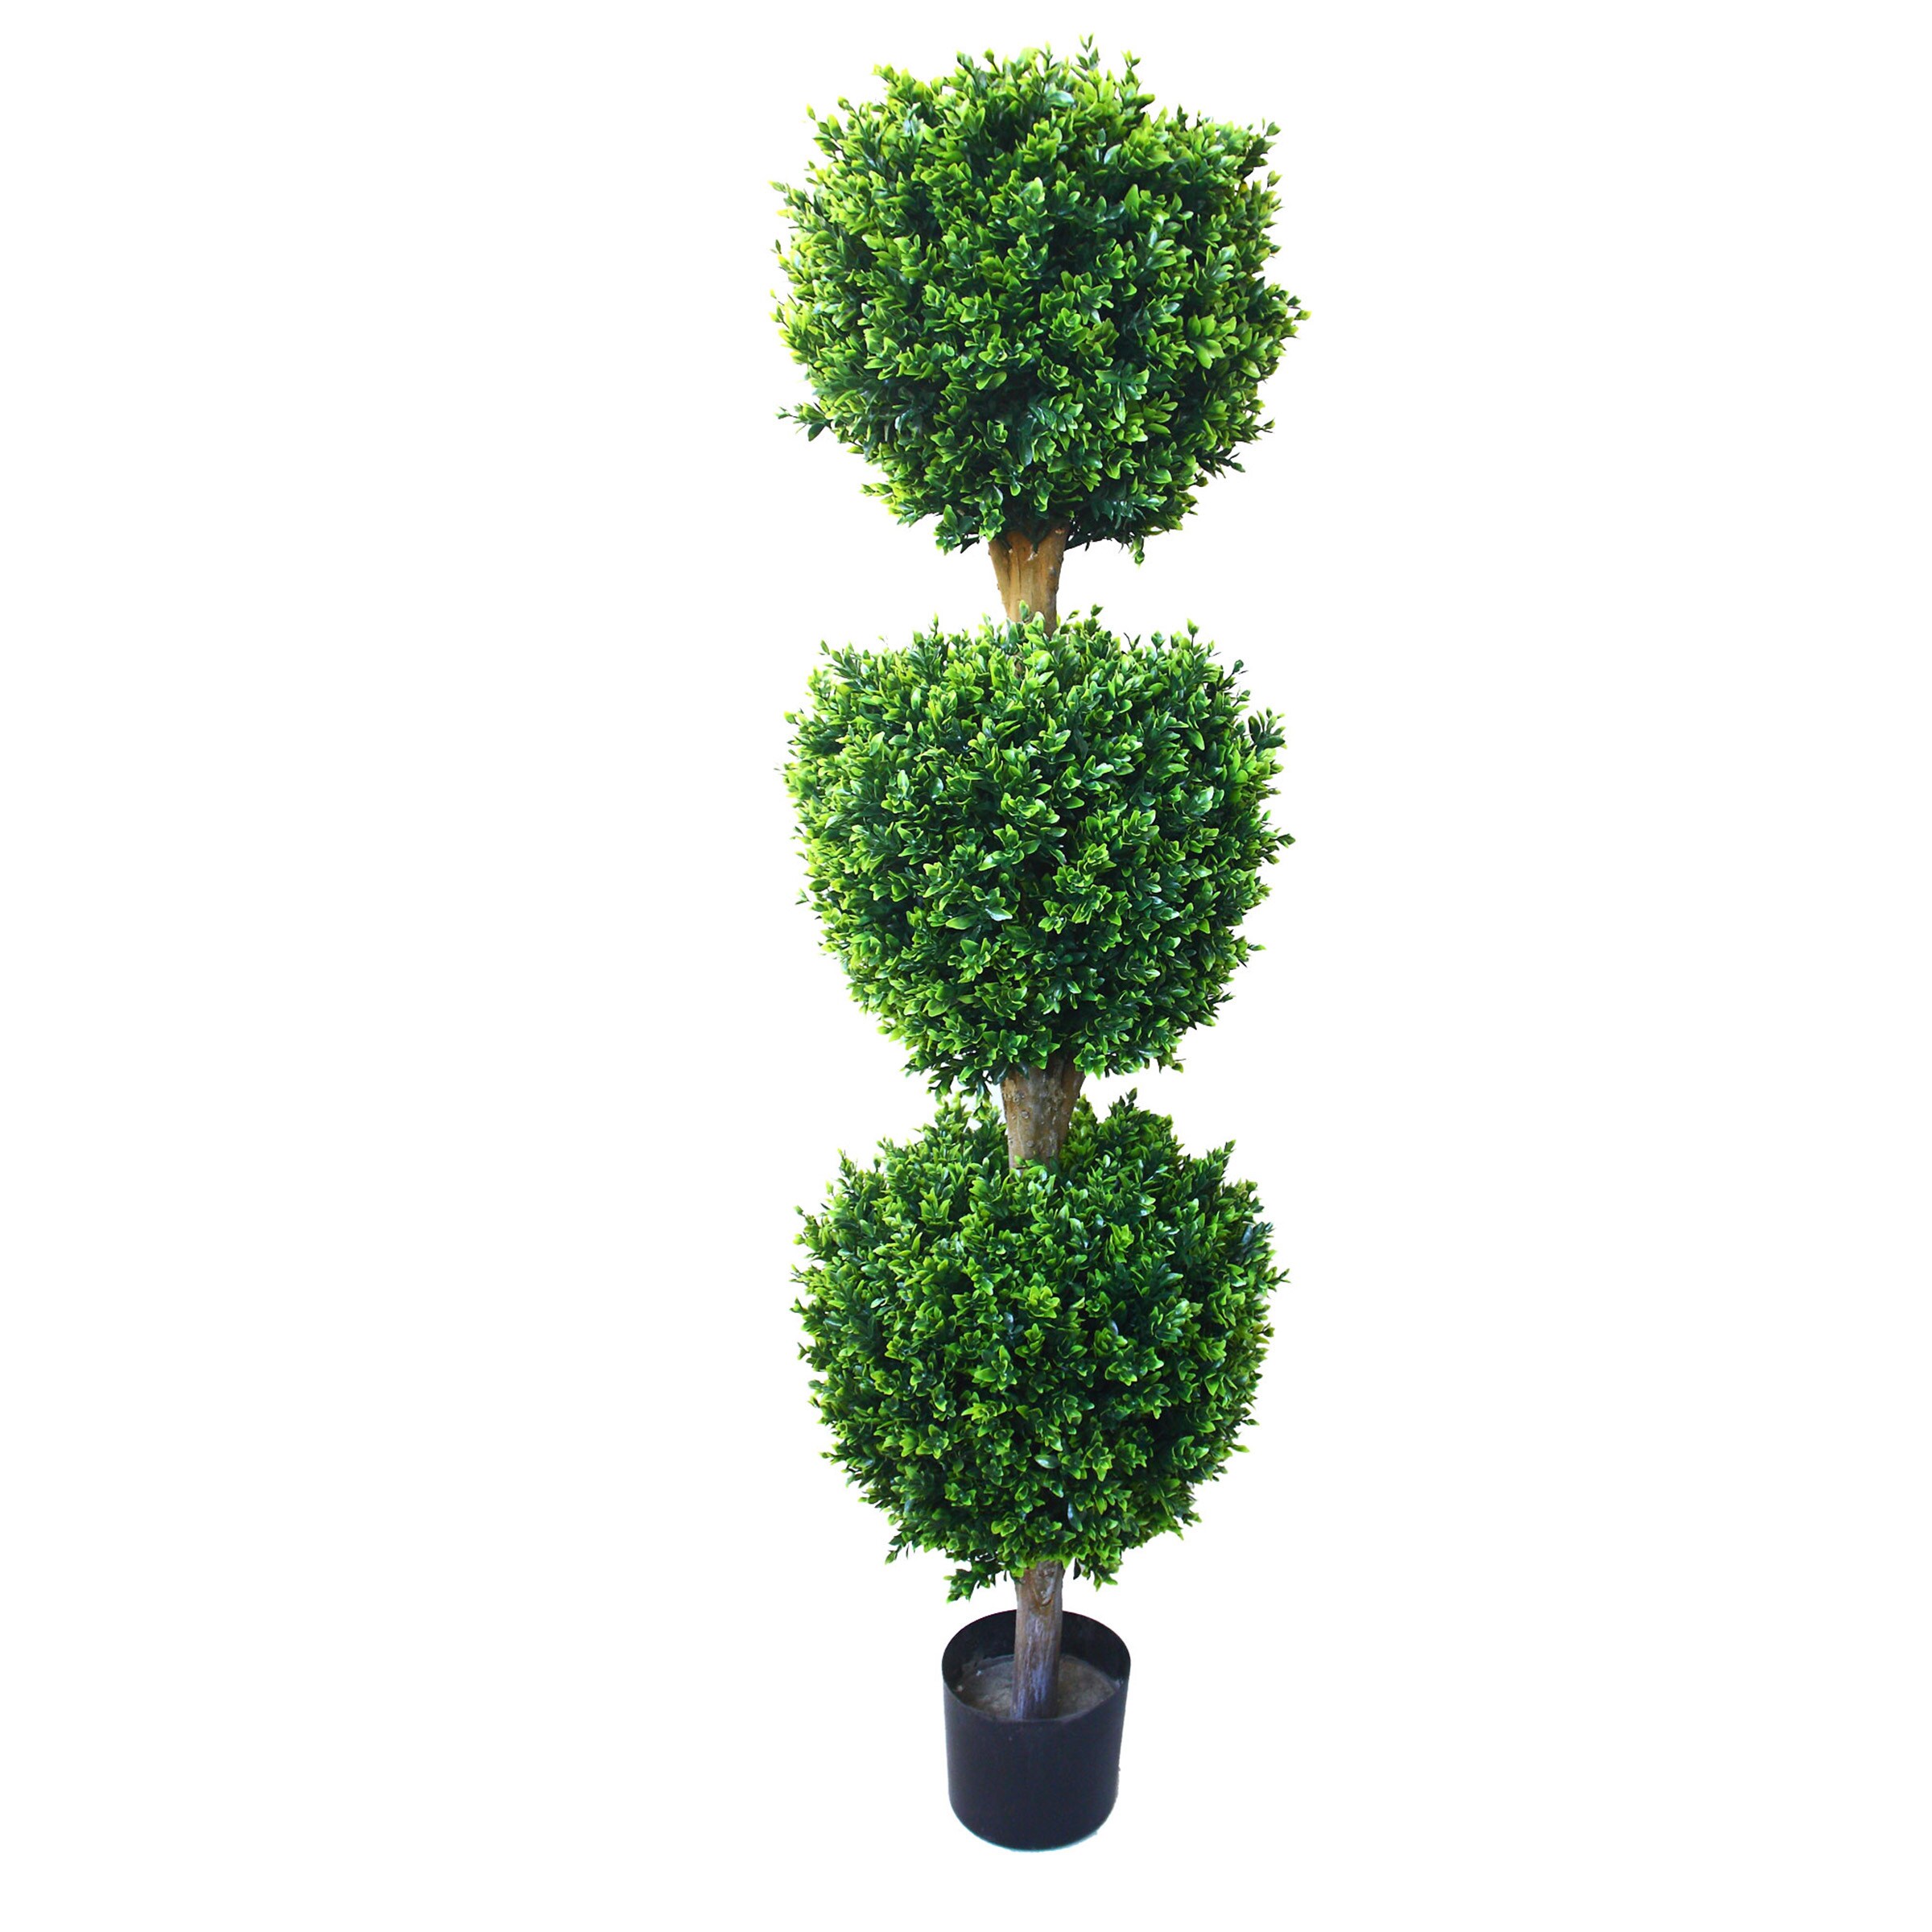 Large Topiary Artificial Potted Indoor Outdoor Home House Plant Tree Home Office 